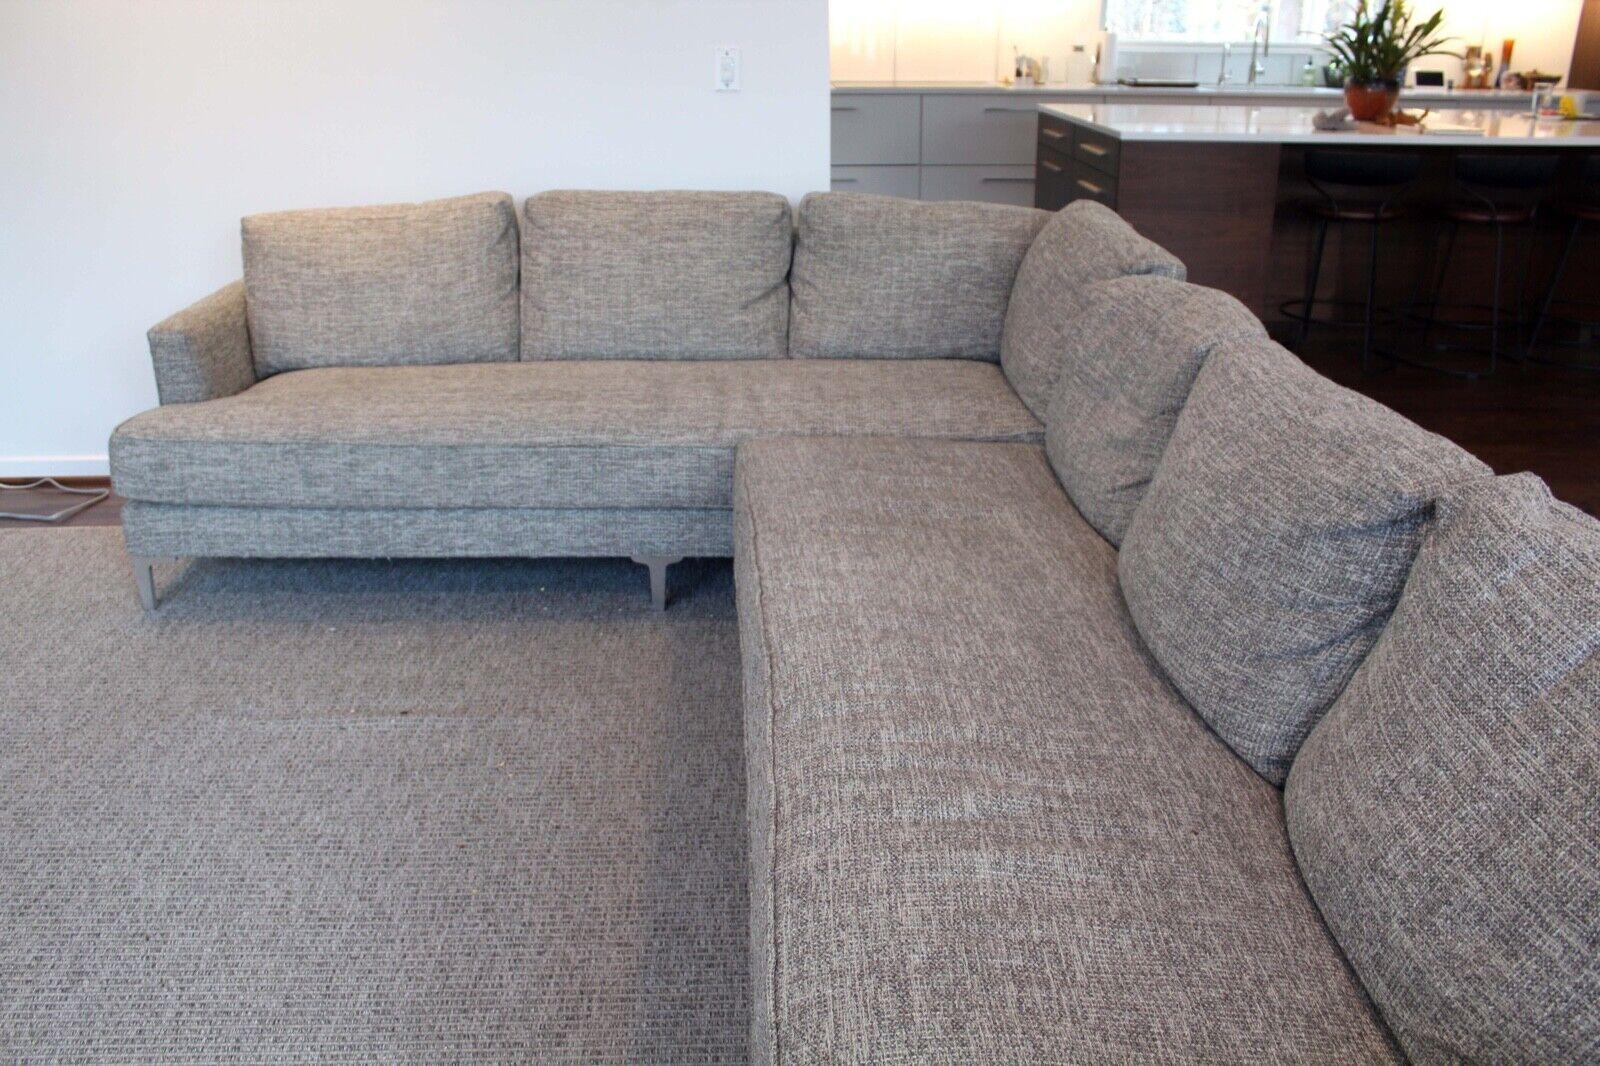 This luxurious Kravet grey sectional is the perfect addition to any living space. This sectional features plush, comfortable cushions and deep seating, perfect for lounging or entertaining. This sectional comes with both medium fill and hard fill